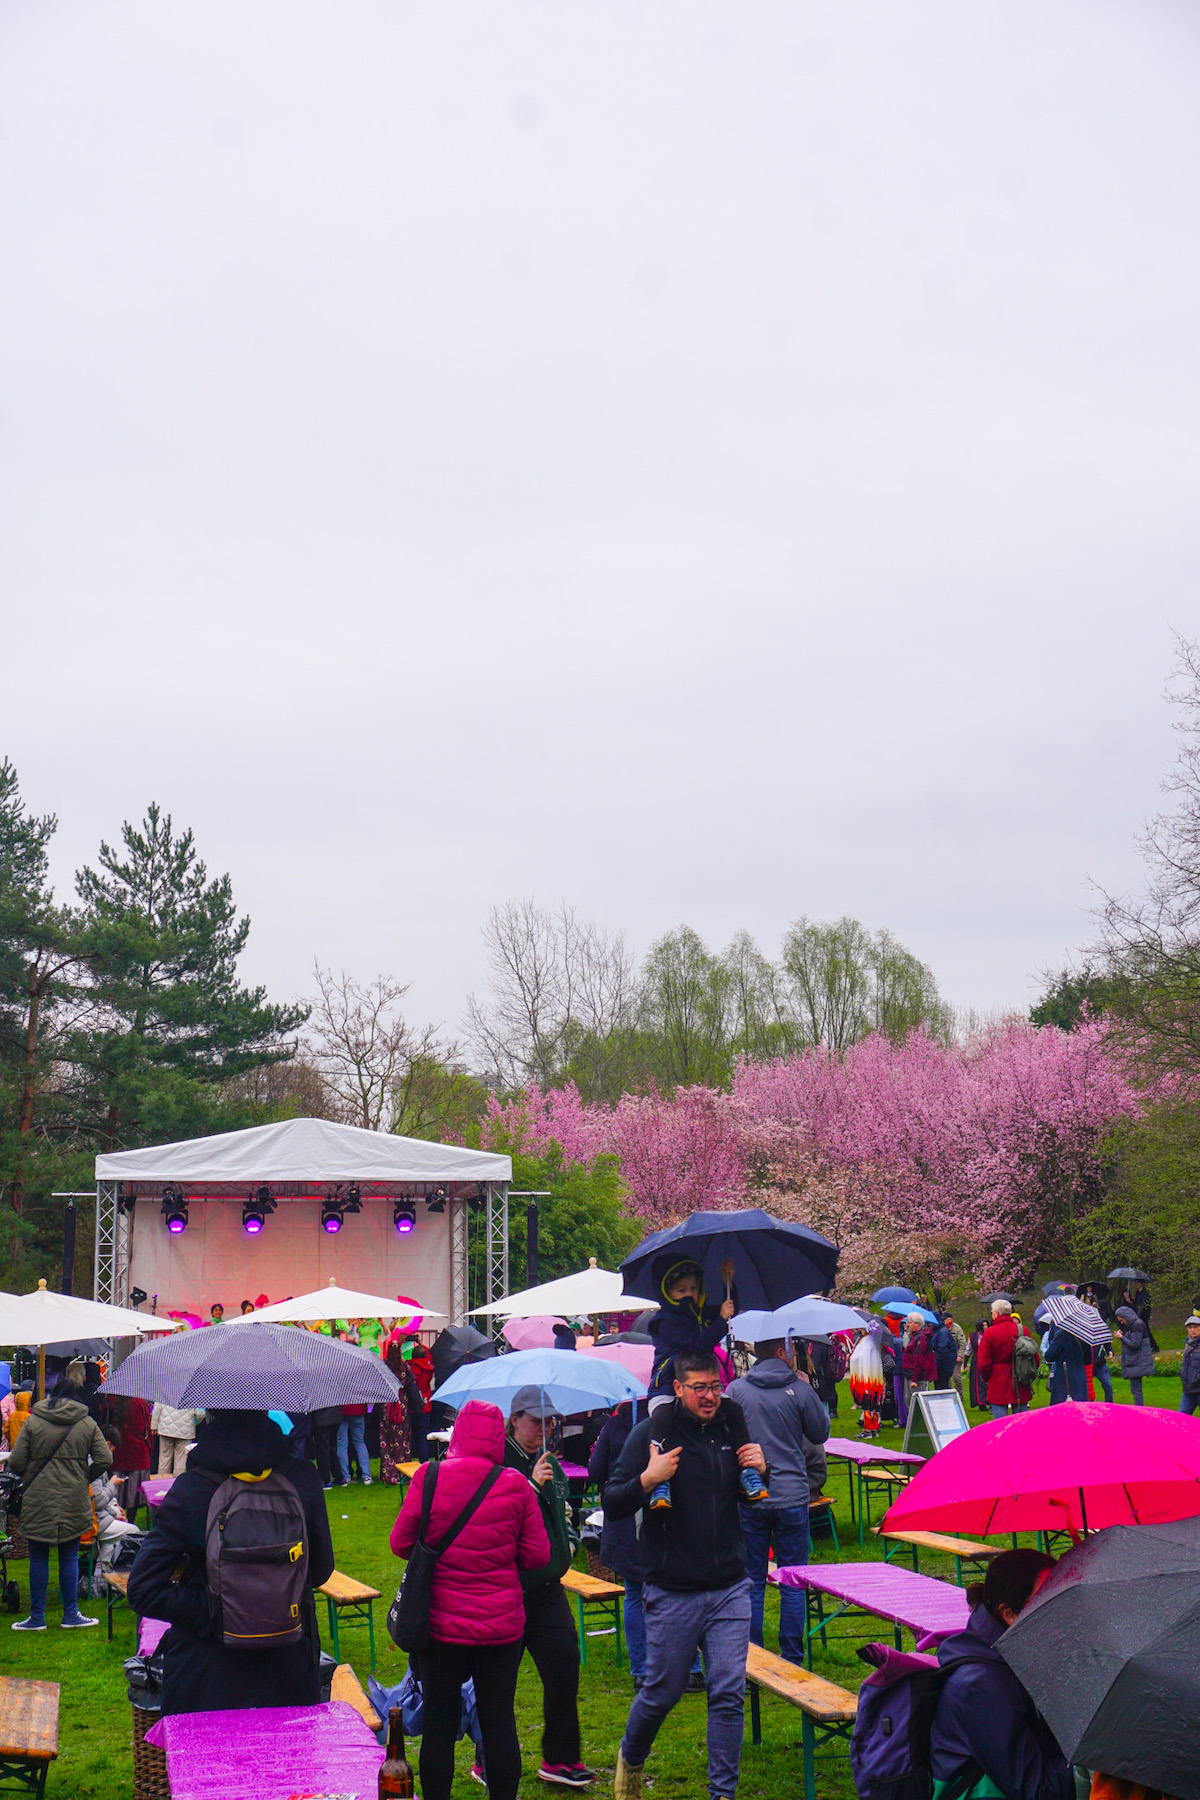 Onlookers with umbrellas at the Berlin Cherry Blossom Festival. 